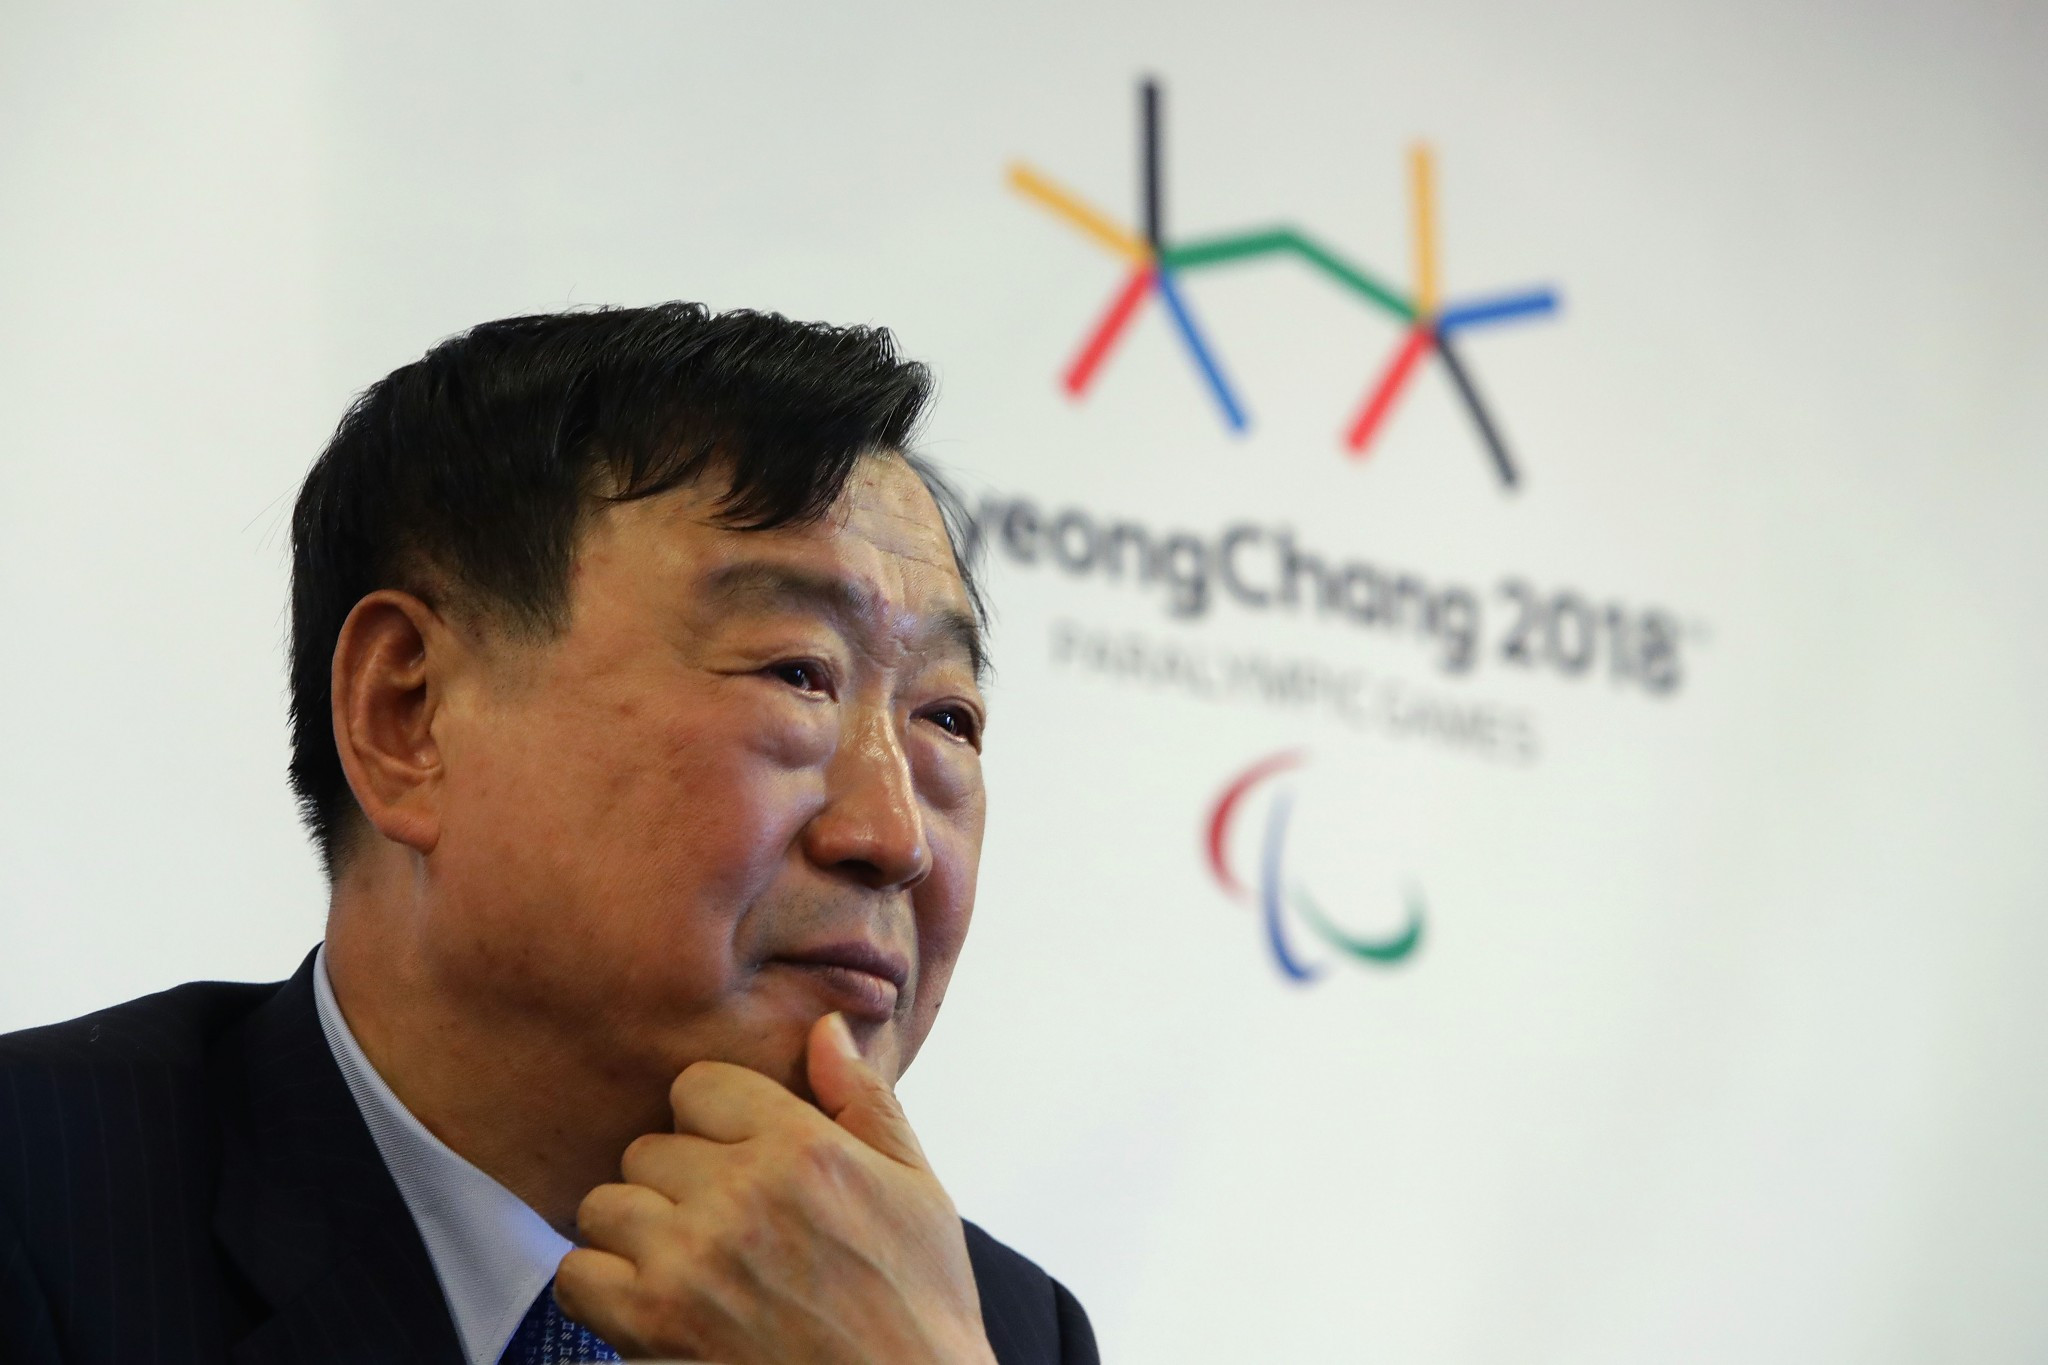 Organisers expect 70 per cent of Pyeongchang 2018 Paralympics tickets to be sold locally